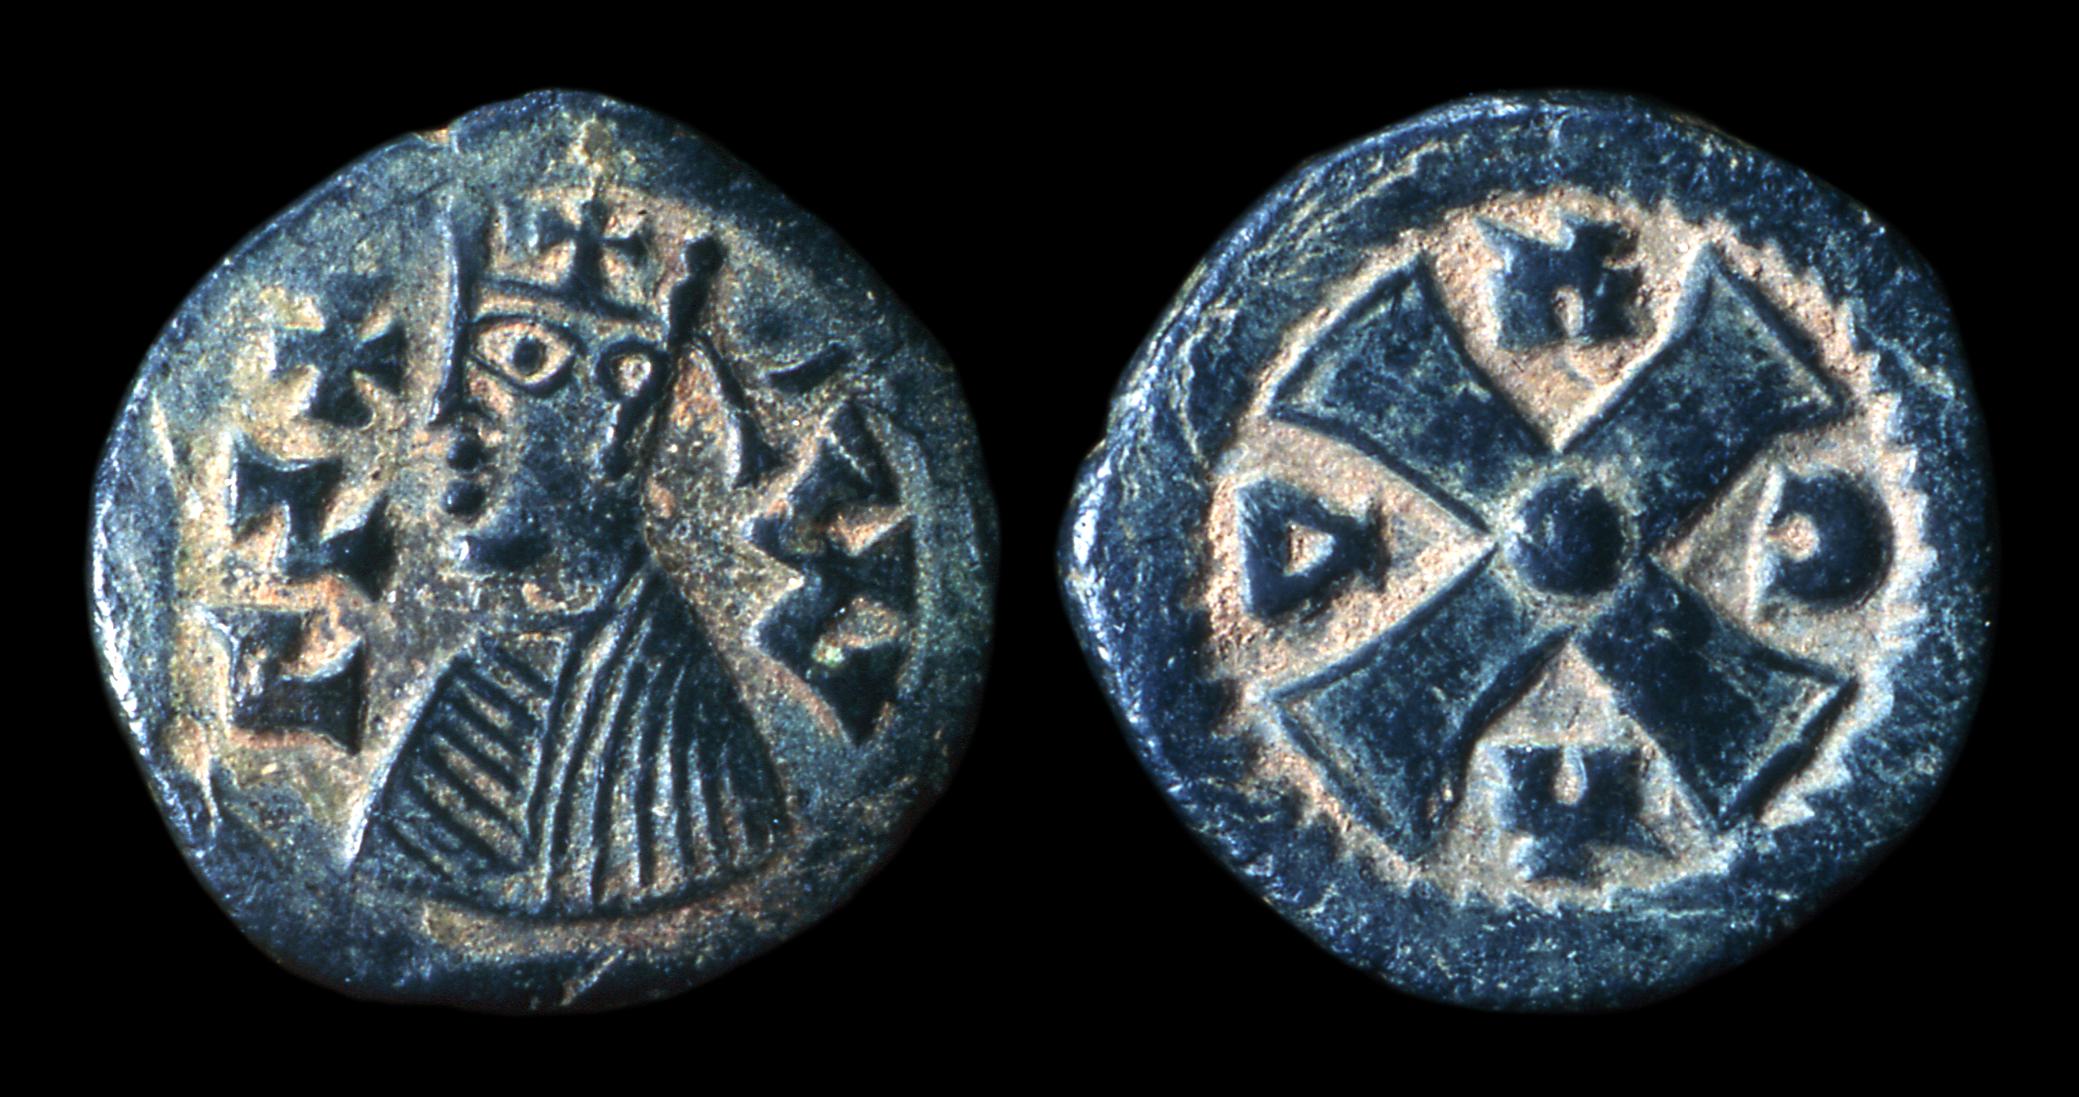 Obverse: Head and shoulders bust of King Joel crowned with a cross; reverse: cross, Copper alloy coin, c. 550–600 C.E., copper alloy, minted in Aksum, modern Ethiopia (© Trustees of the British Museum)